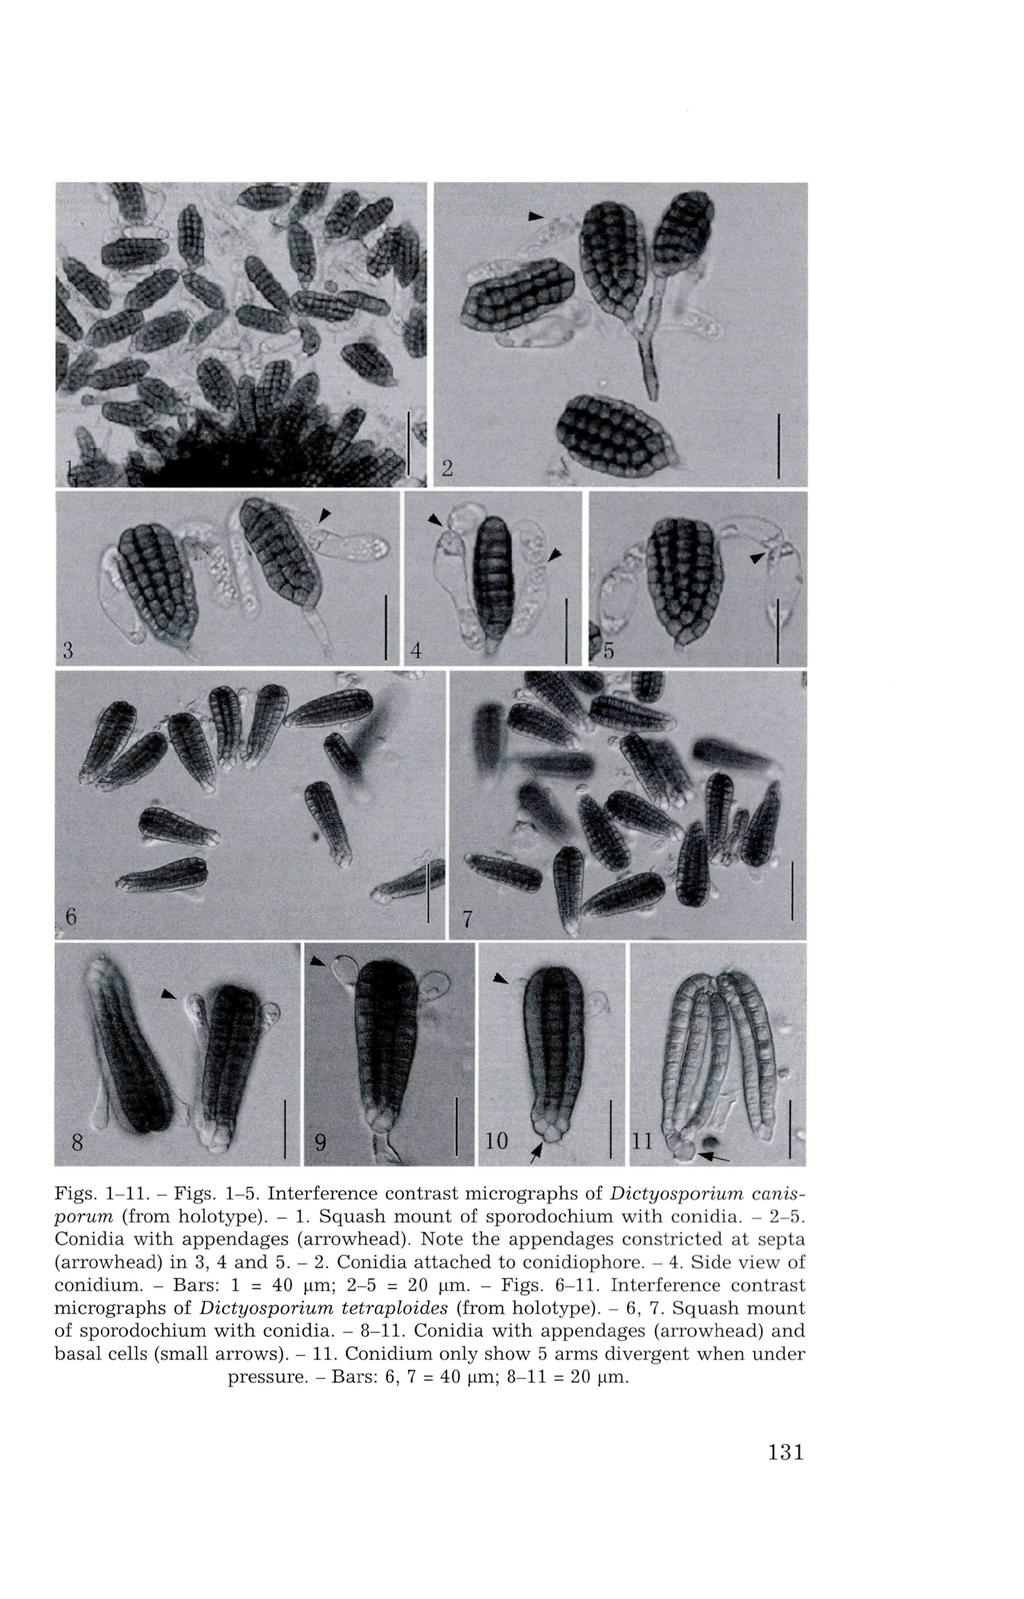 8 Figs. 1-11. - Figs. 1-5. Interference contrast micrographs of Dictyosporium canisporum (from holotype). - 1. Squash mount of sporodochium with conidia. - 2-5. Conidia with appendages (arrowhead).